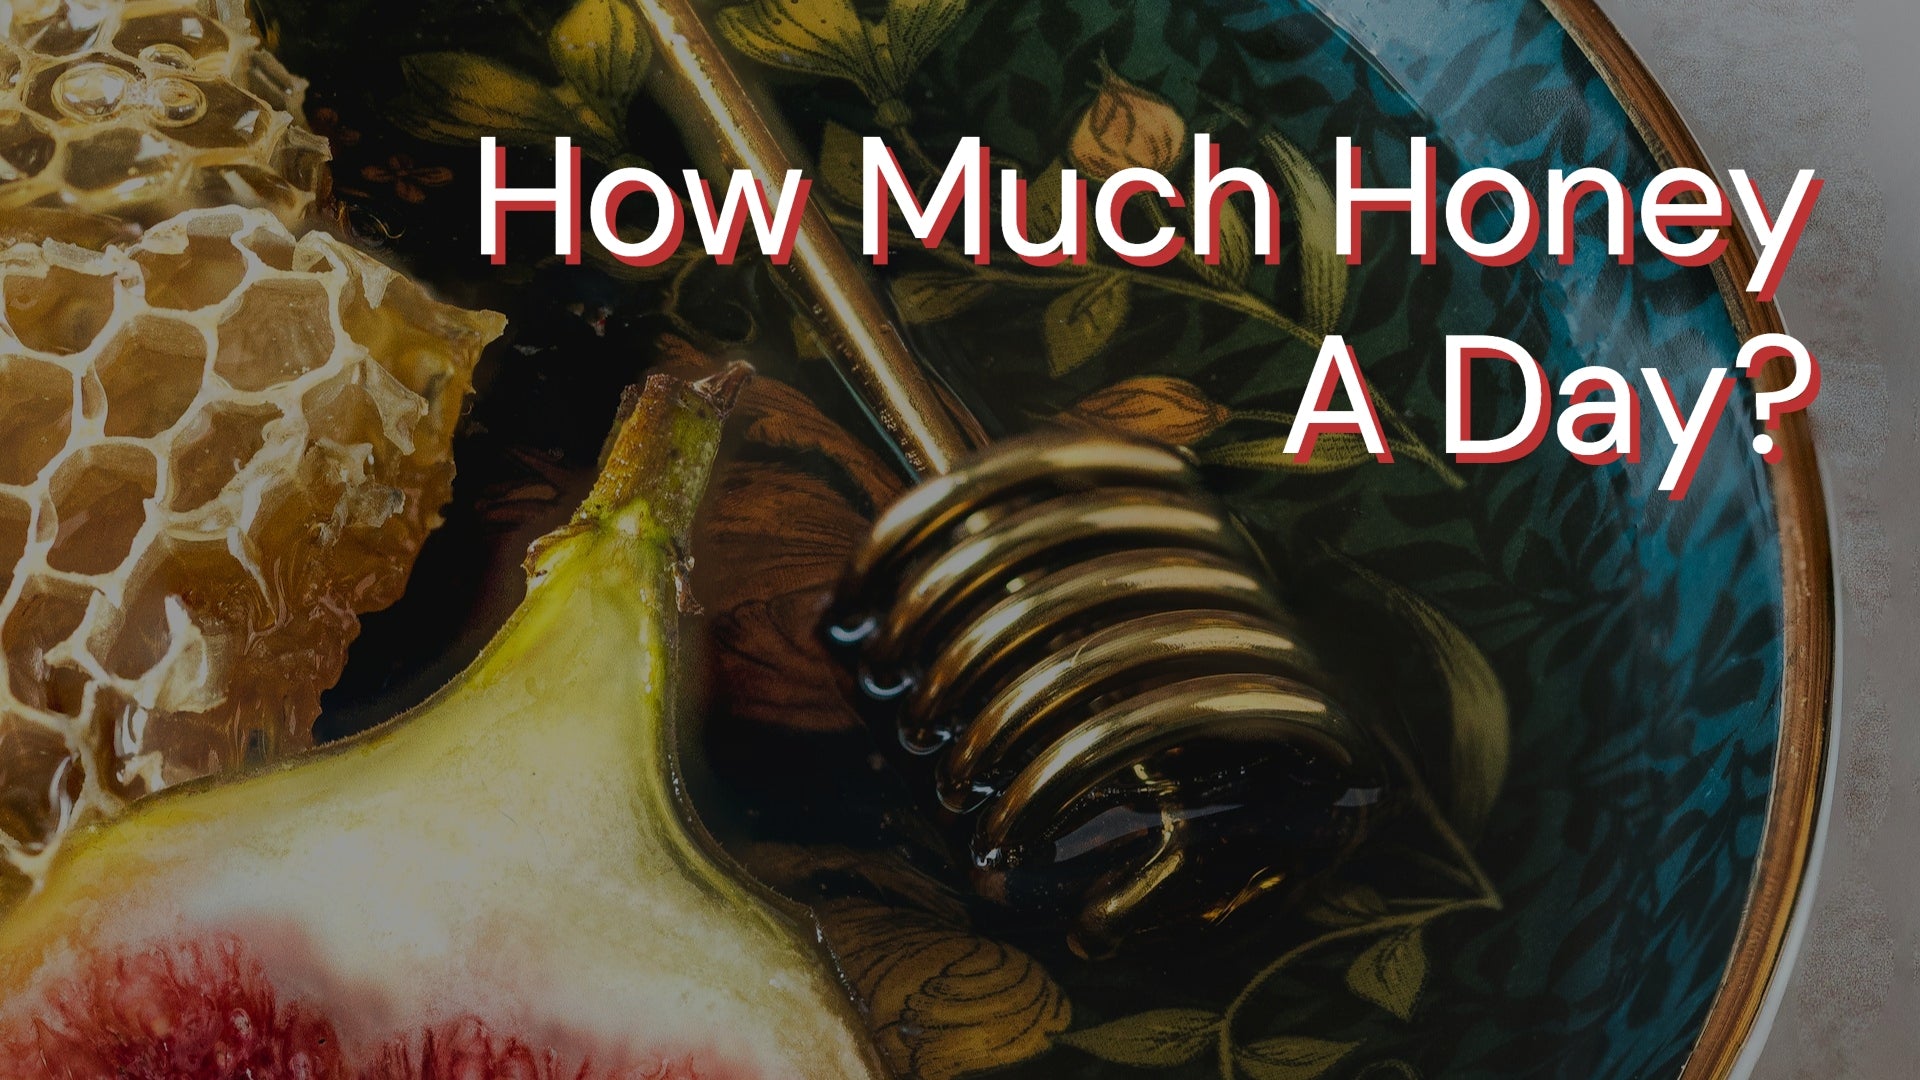 How Much Honey Should I Consume Per Day?